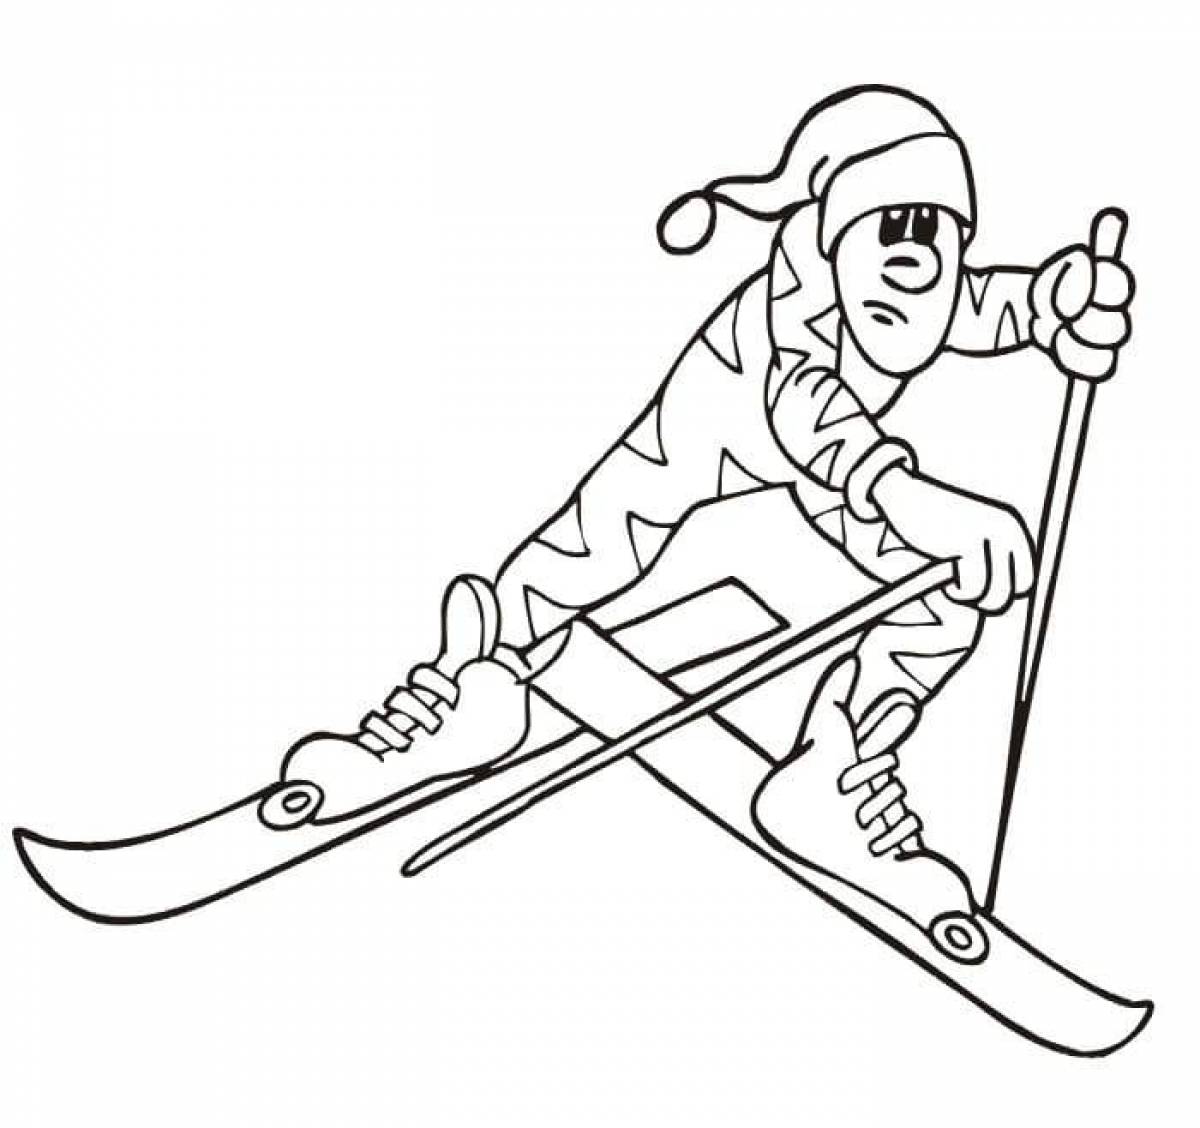 Sport skier coloring page